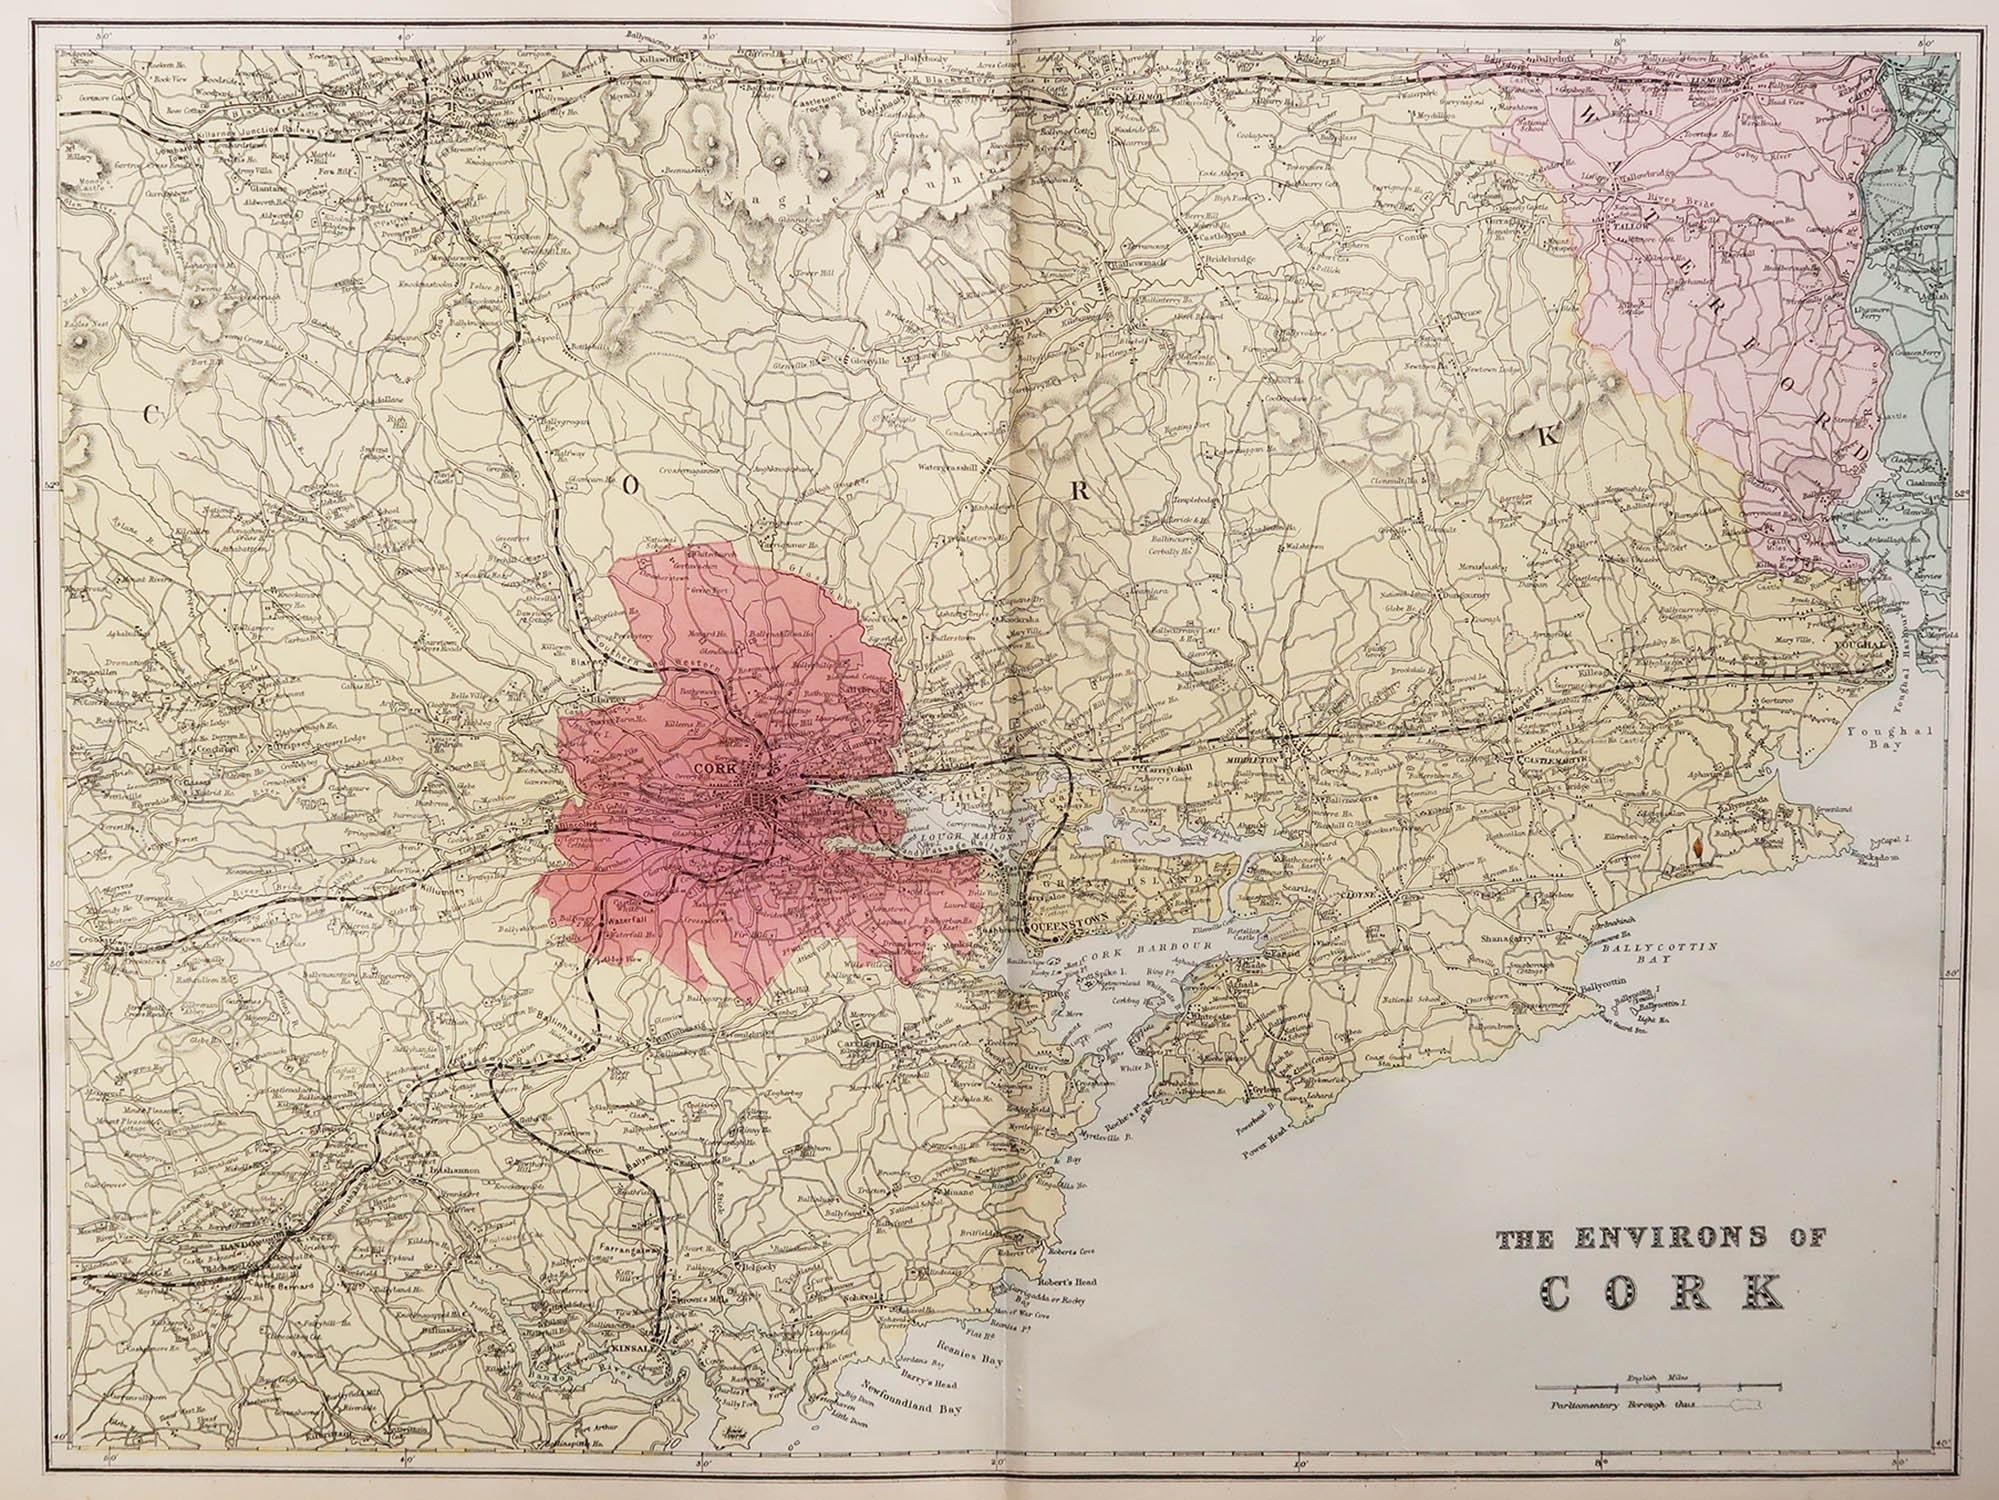 Great map of The Environs of Cork

Published circa 1880

Unframed

Free shipping.

